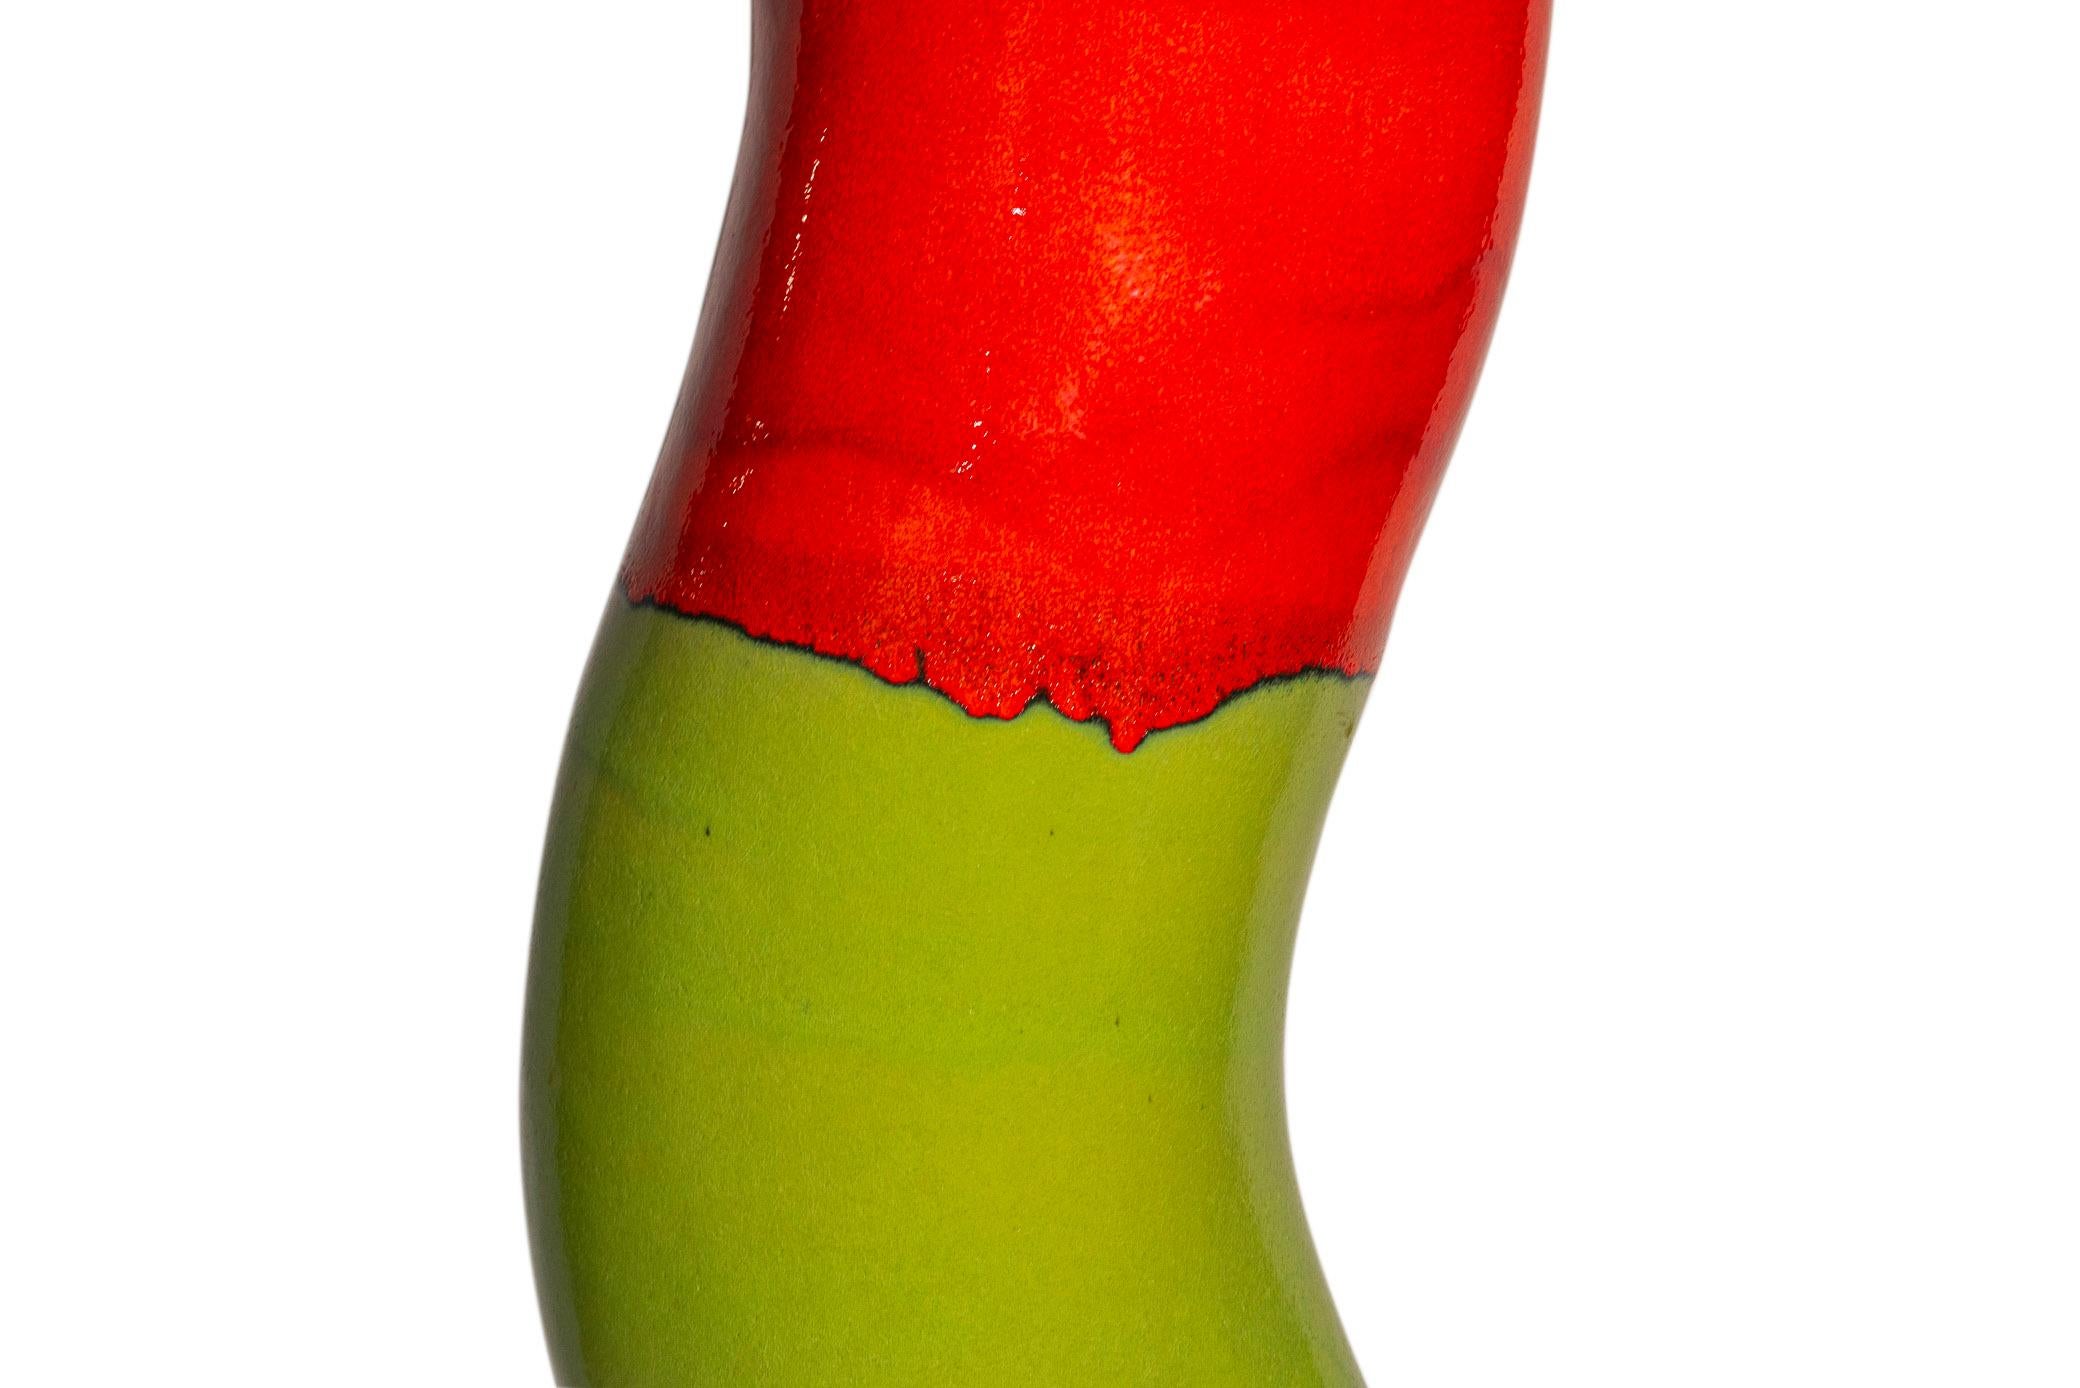 Totem,
Lacquered ceramic,
One half green and one half red, 
Made of one piece,
France, circa 1970.

Measures: Height 165 cm, diameter 27 cm.